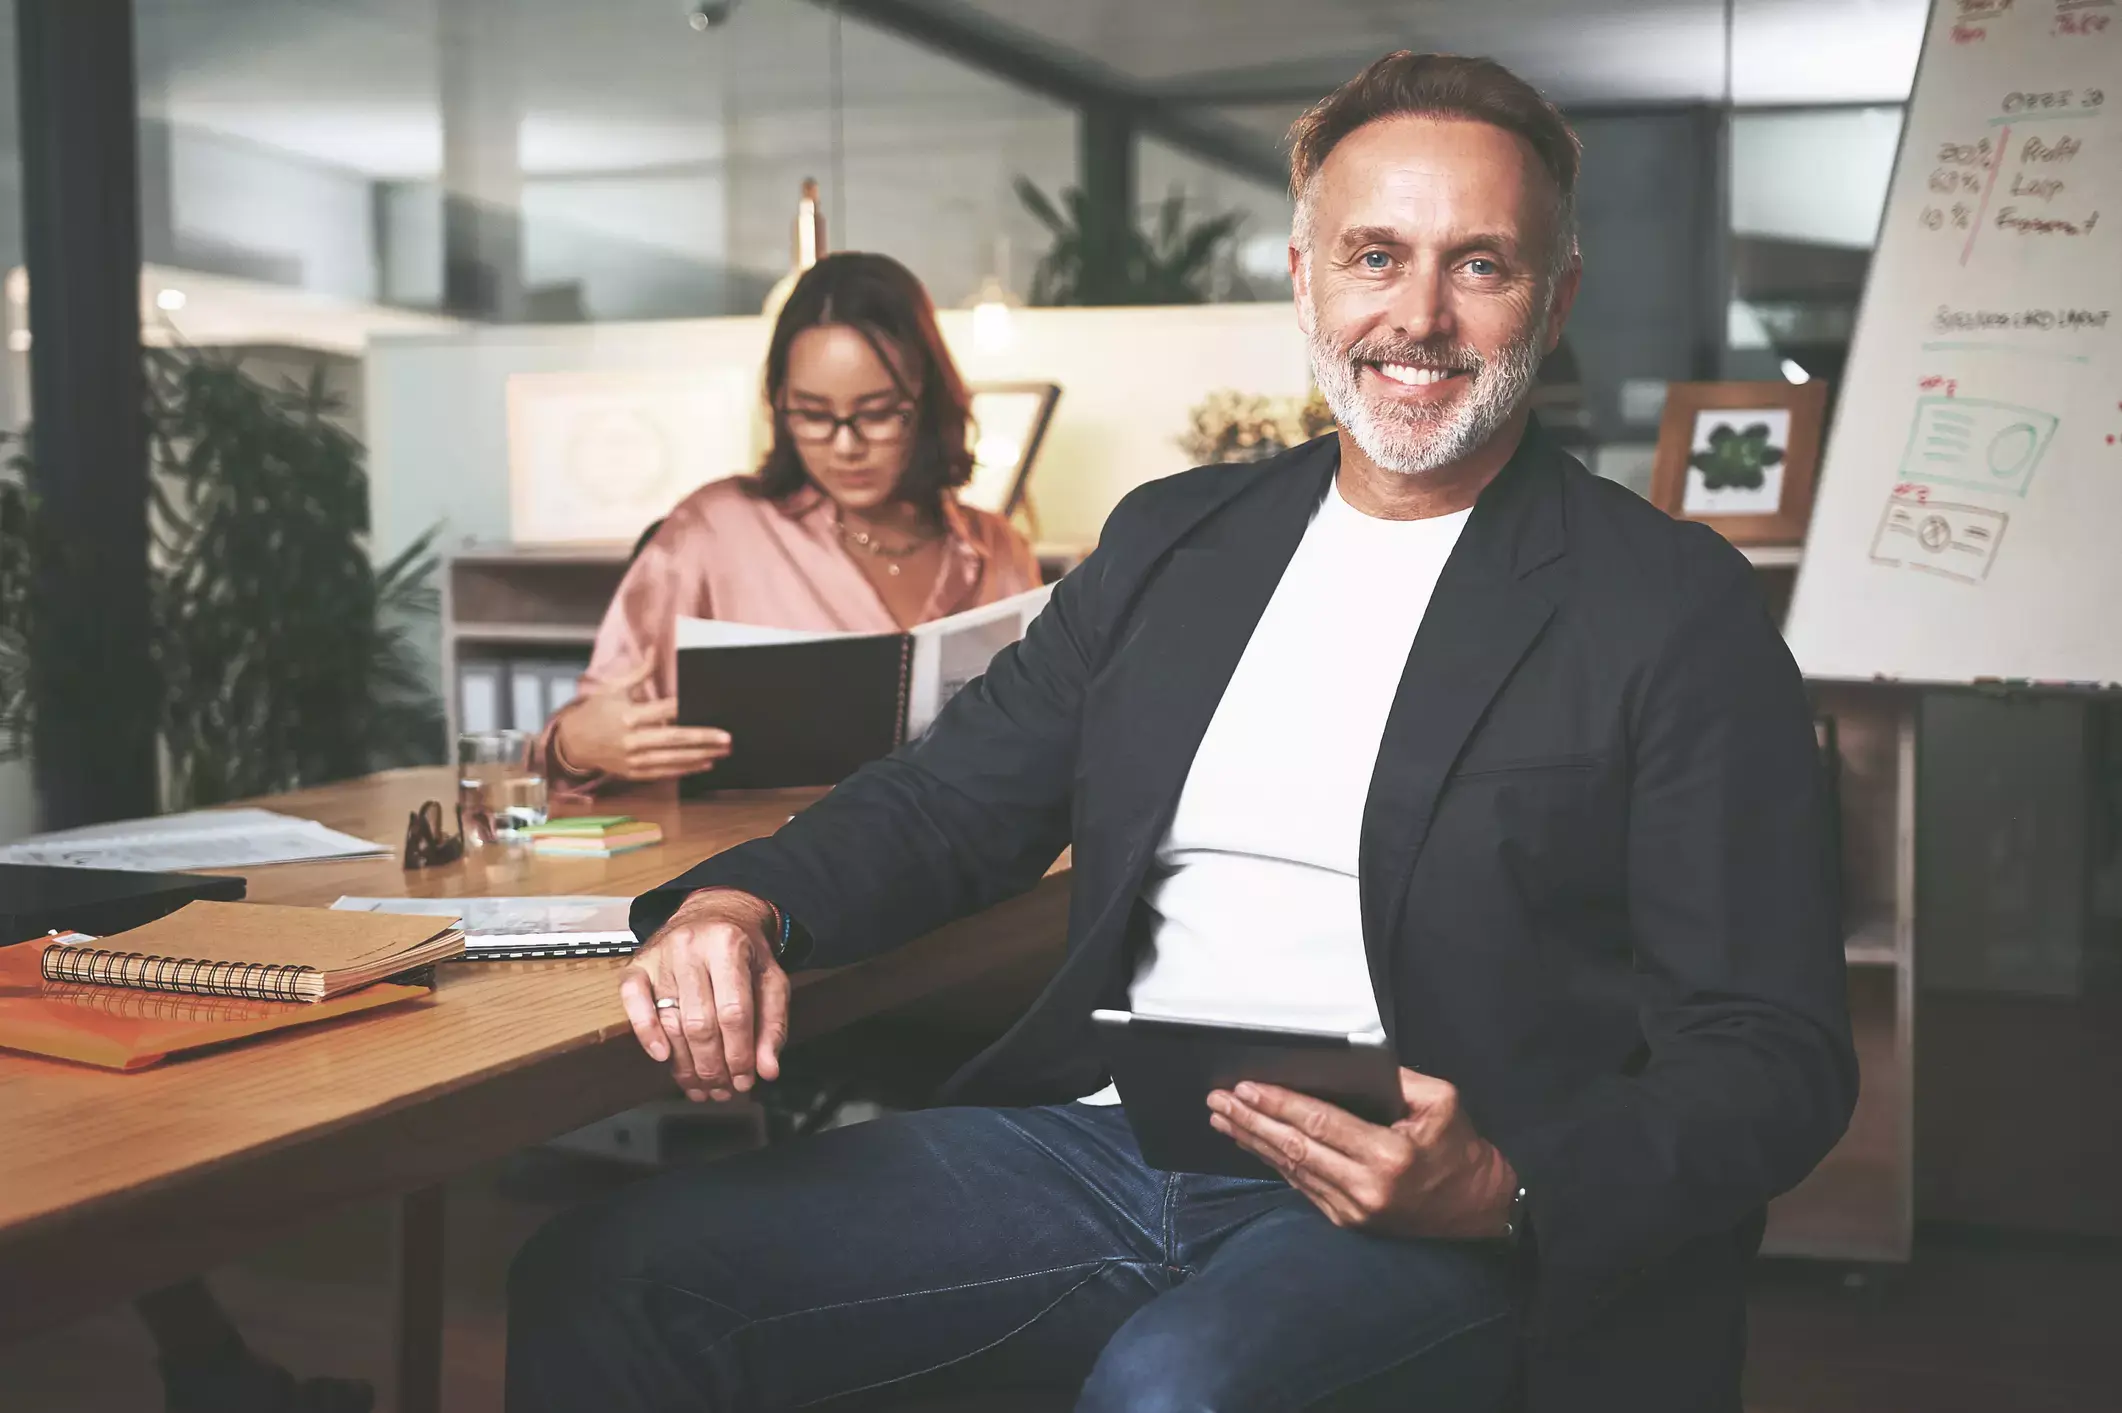 Senior businessman smiles confidently, holding tablet, as young woman reviews loan application in modern office workspace